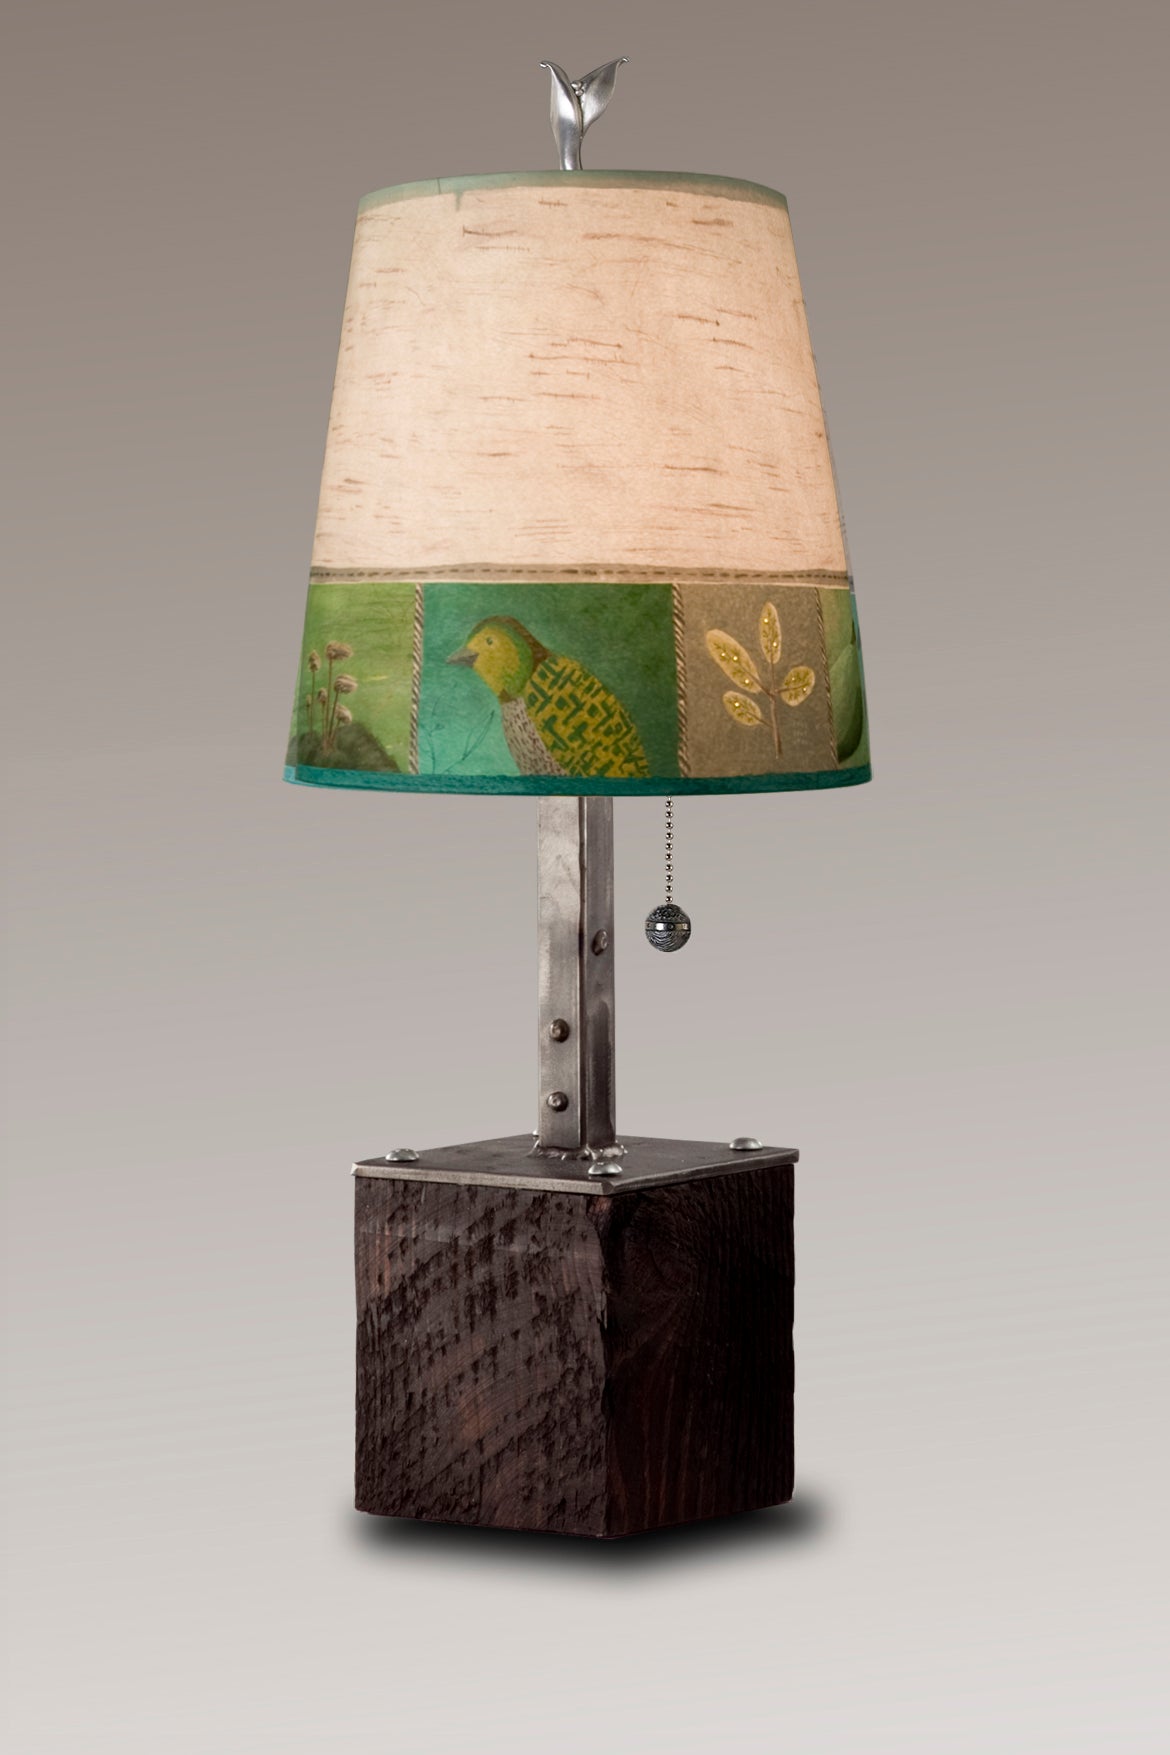 Janna Ugone &amp; Co Table Lamps Steel Table Lamp on Reclaimed Wood with Small Drum Shade in Woodland Trails in Birch